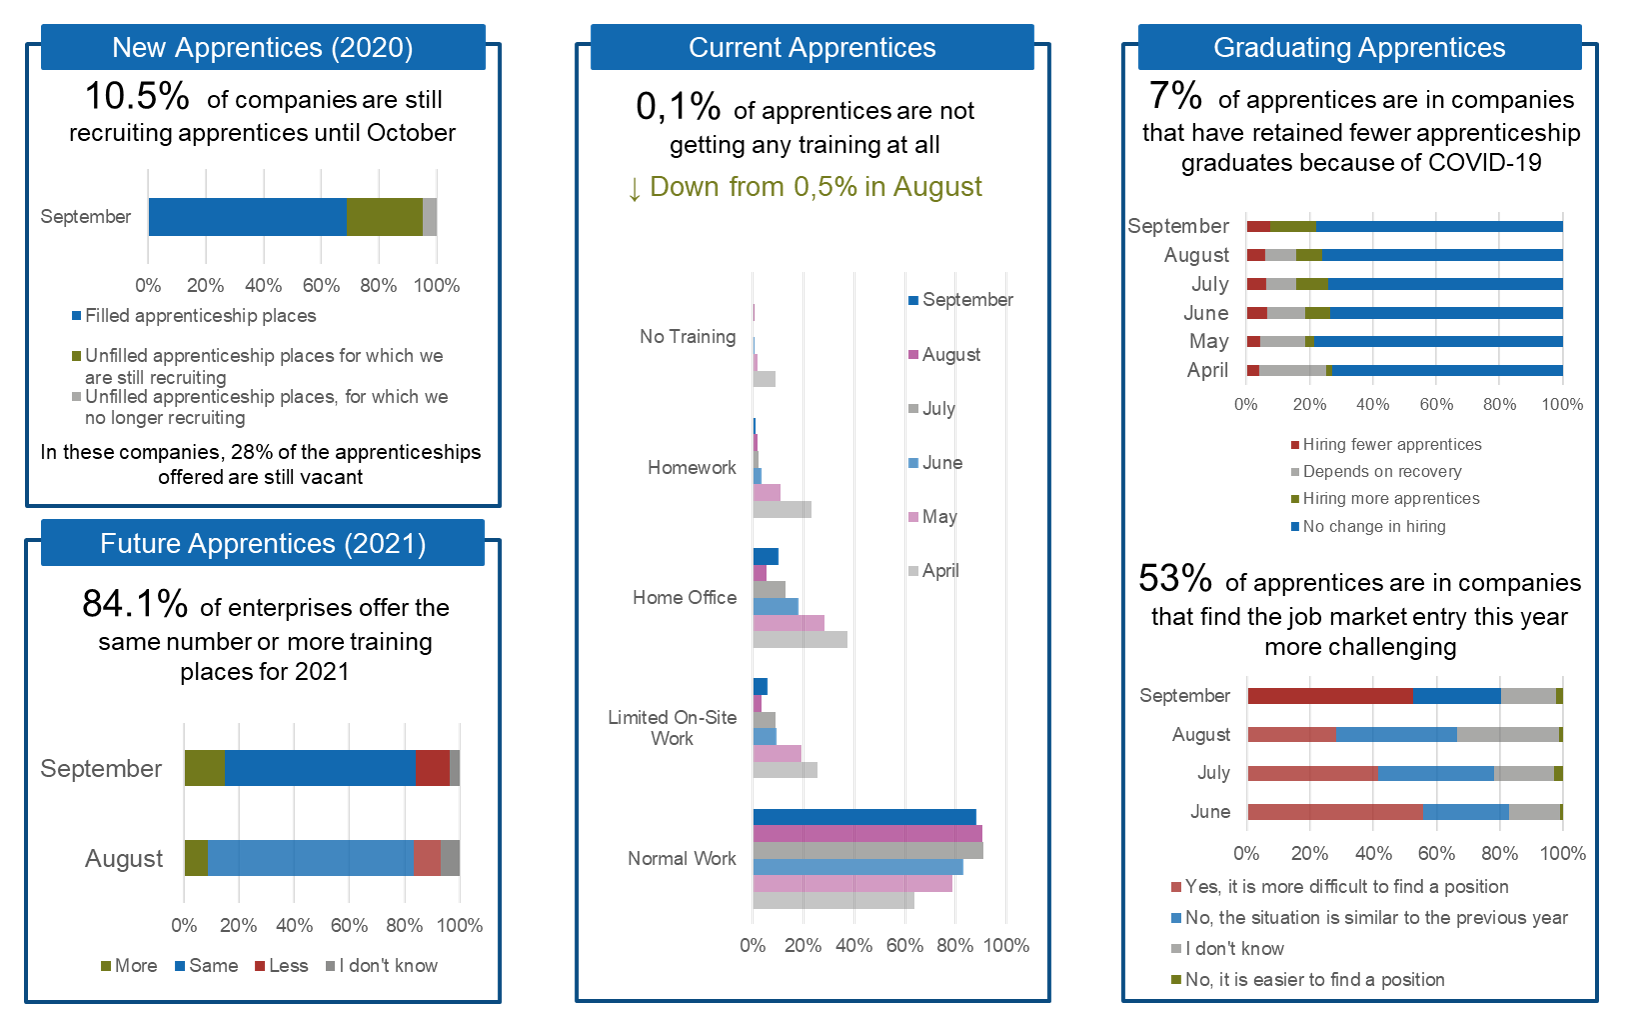 Enlarged view: The Pulse of Apprentices in September 2020 – Main Points